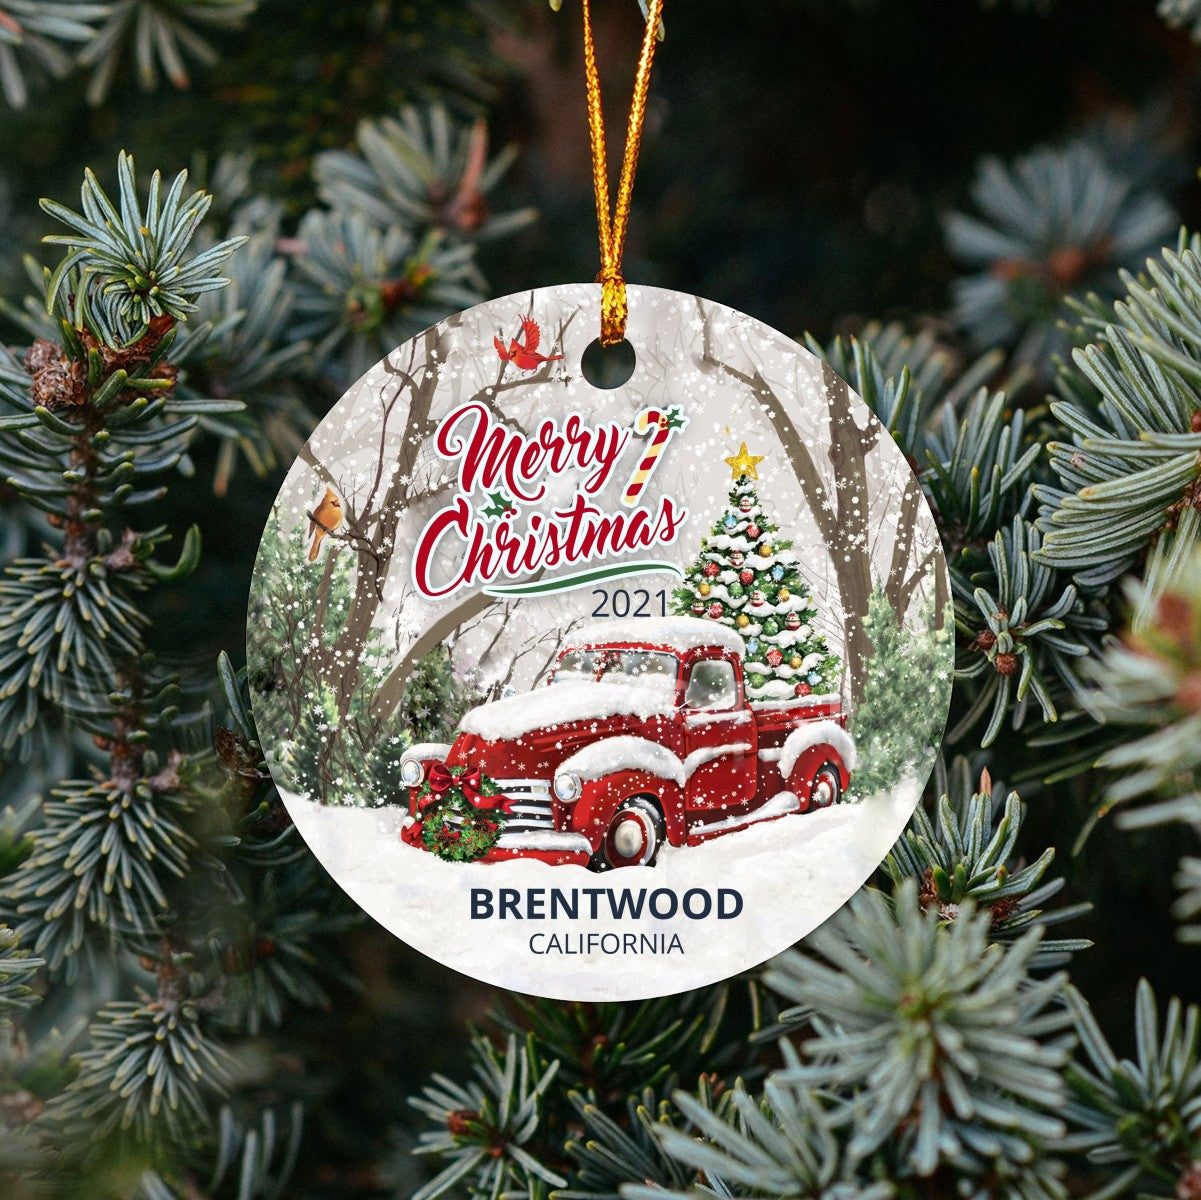 Christmas Tree Ornaments Brentwood - Ornament Customize With Name City And State Brentwood California CA - Red Truck Xmas Ornaments 3'' Plastic Gift For Family, Friend And Housewarming